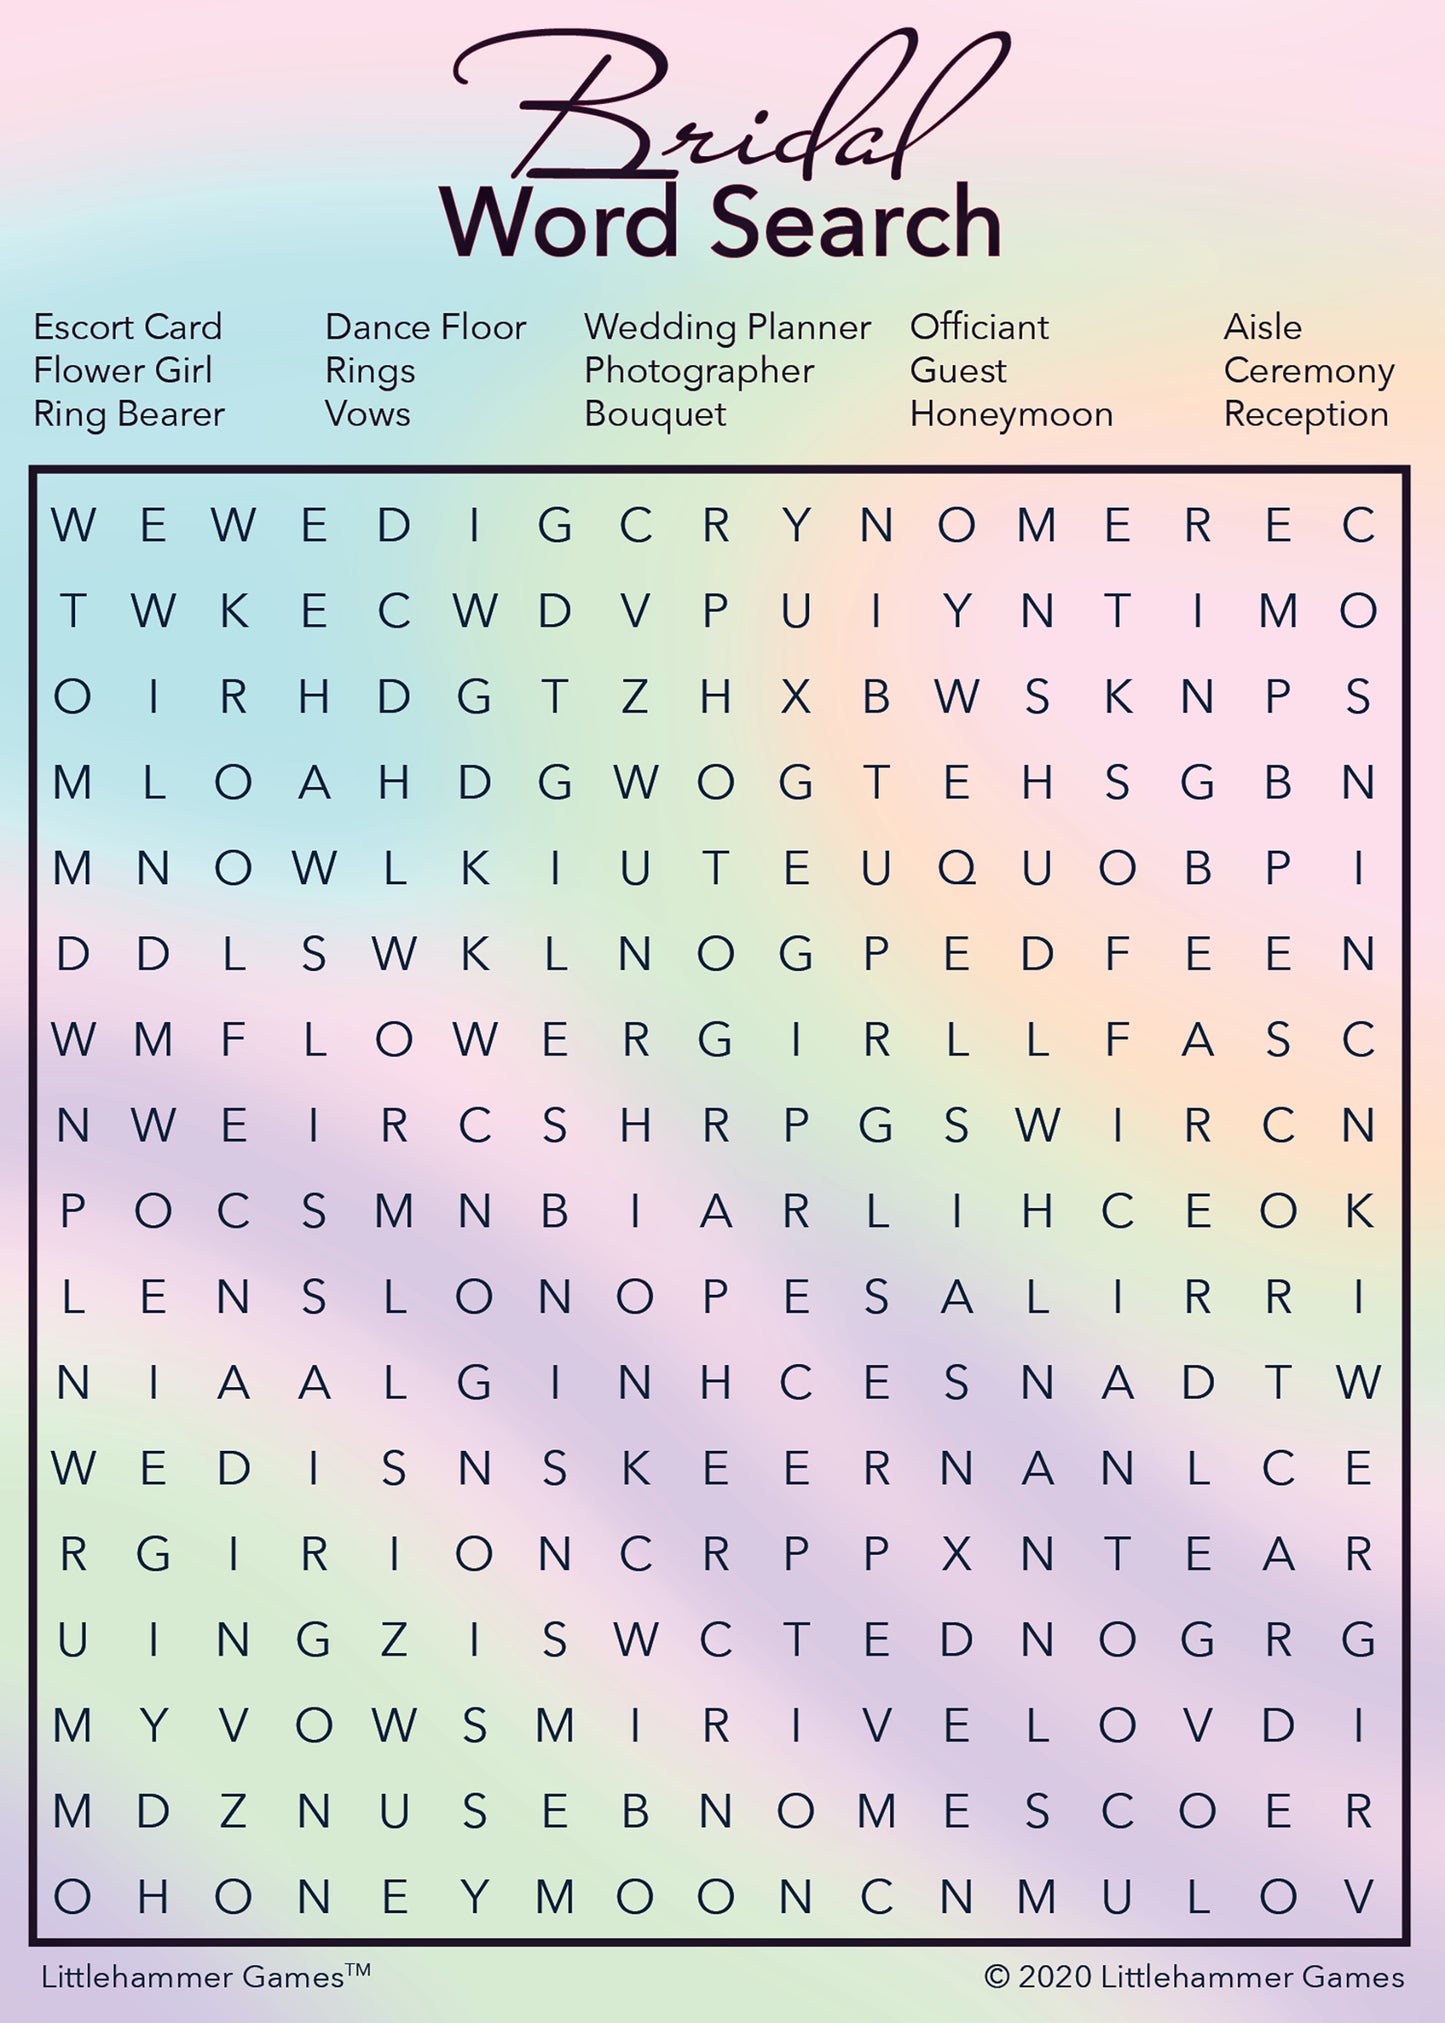 Bridal Word Search game card with a hologram-themed background